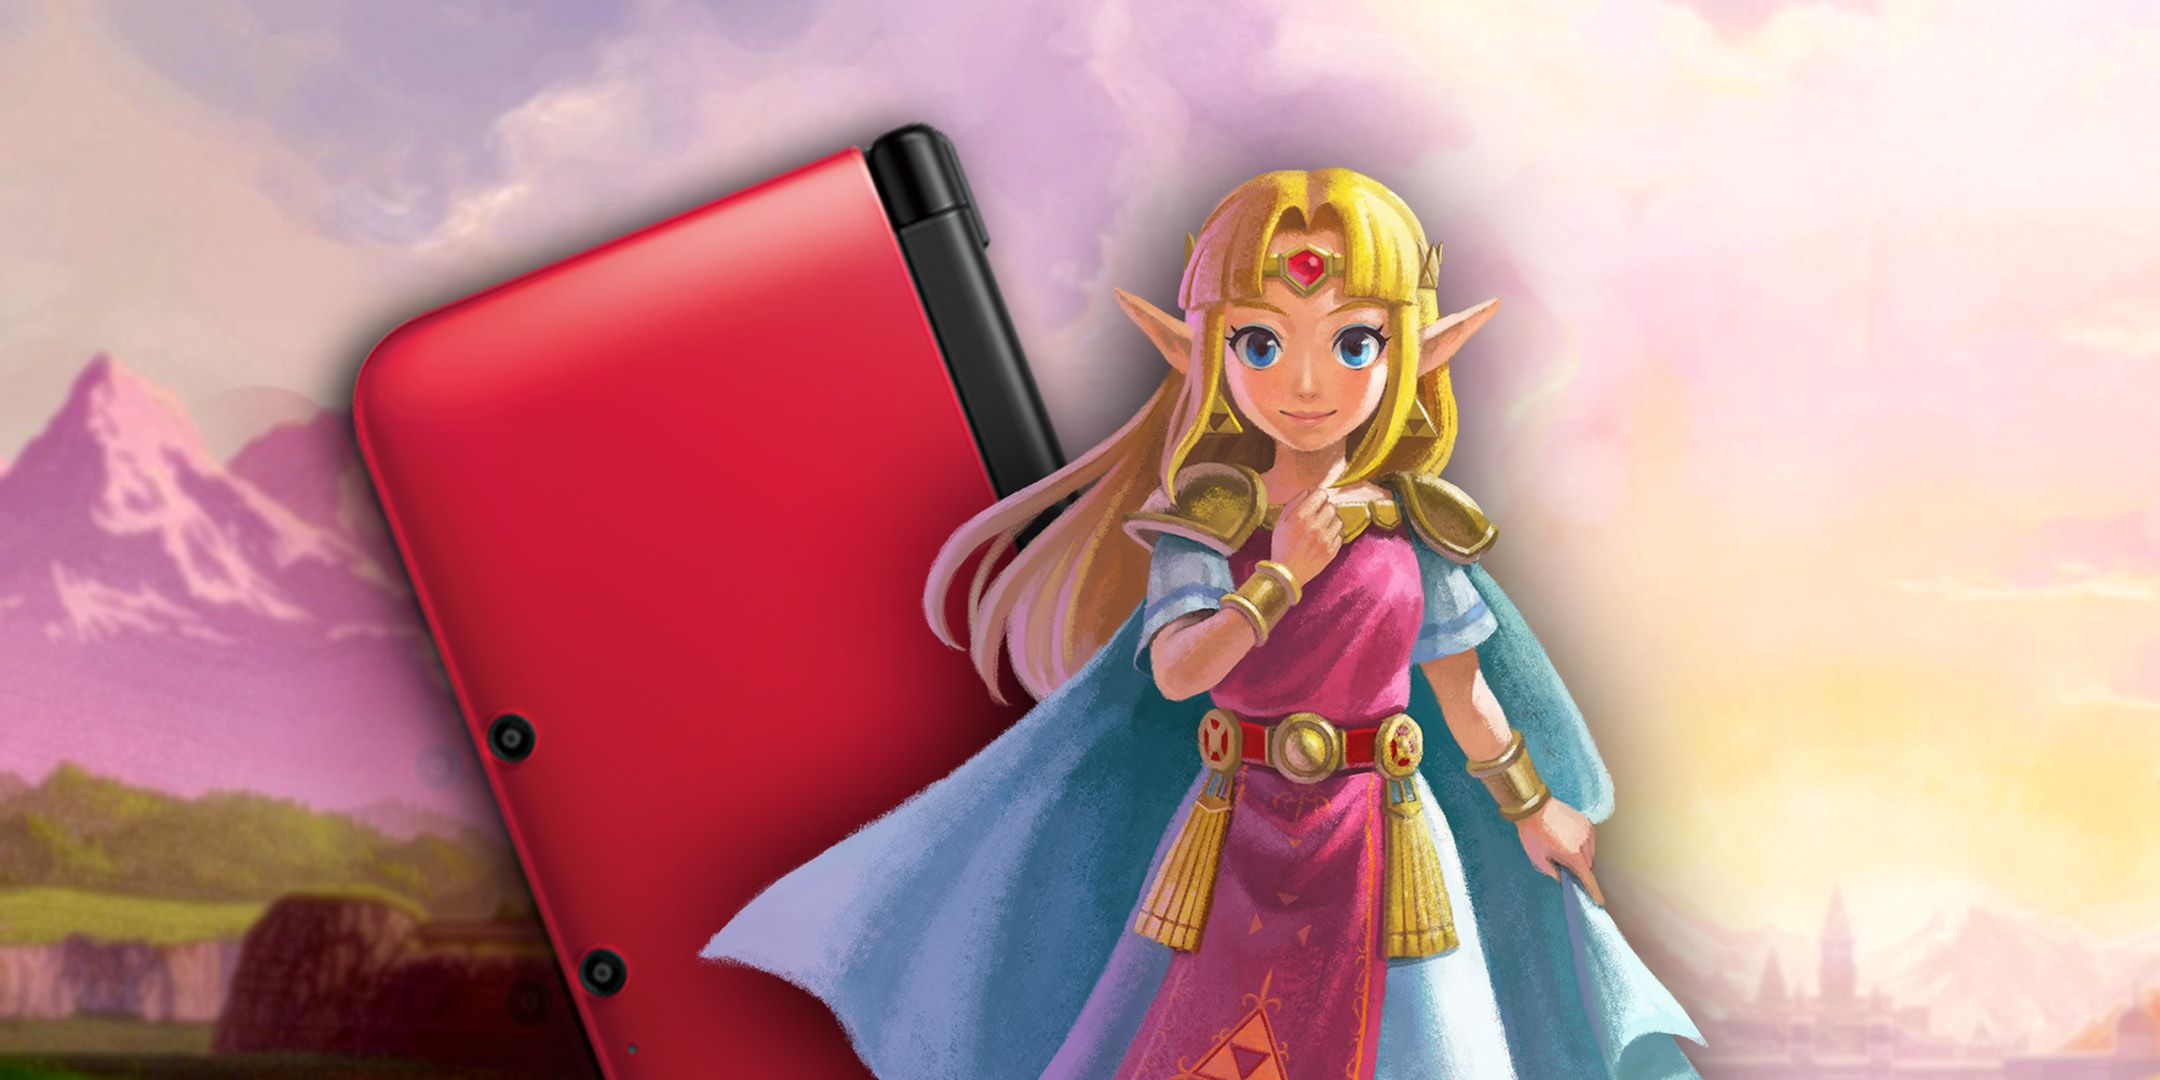 Zelda from A Link Between Worlds standing next to a red 3DS in Hyrule Field